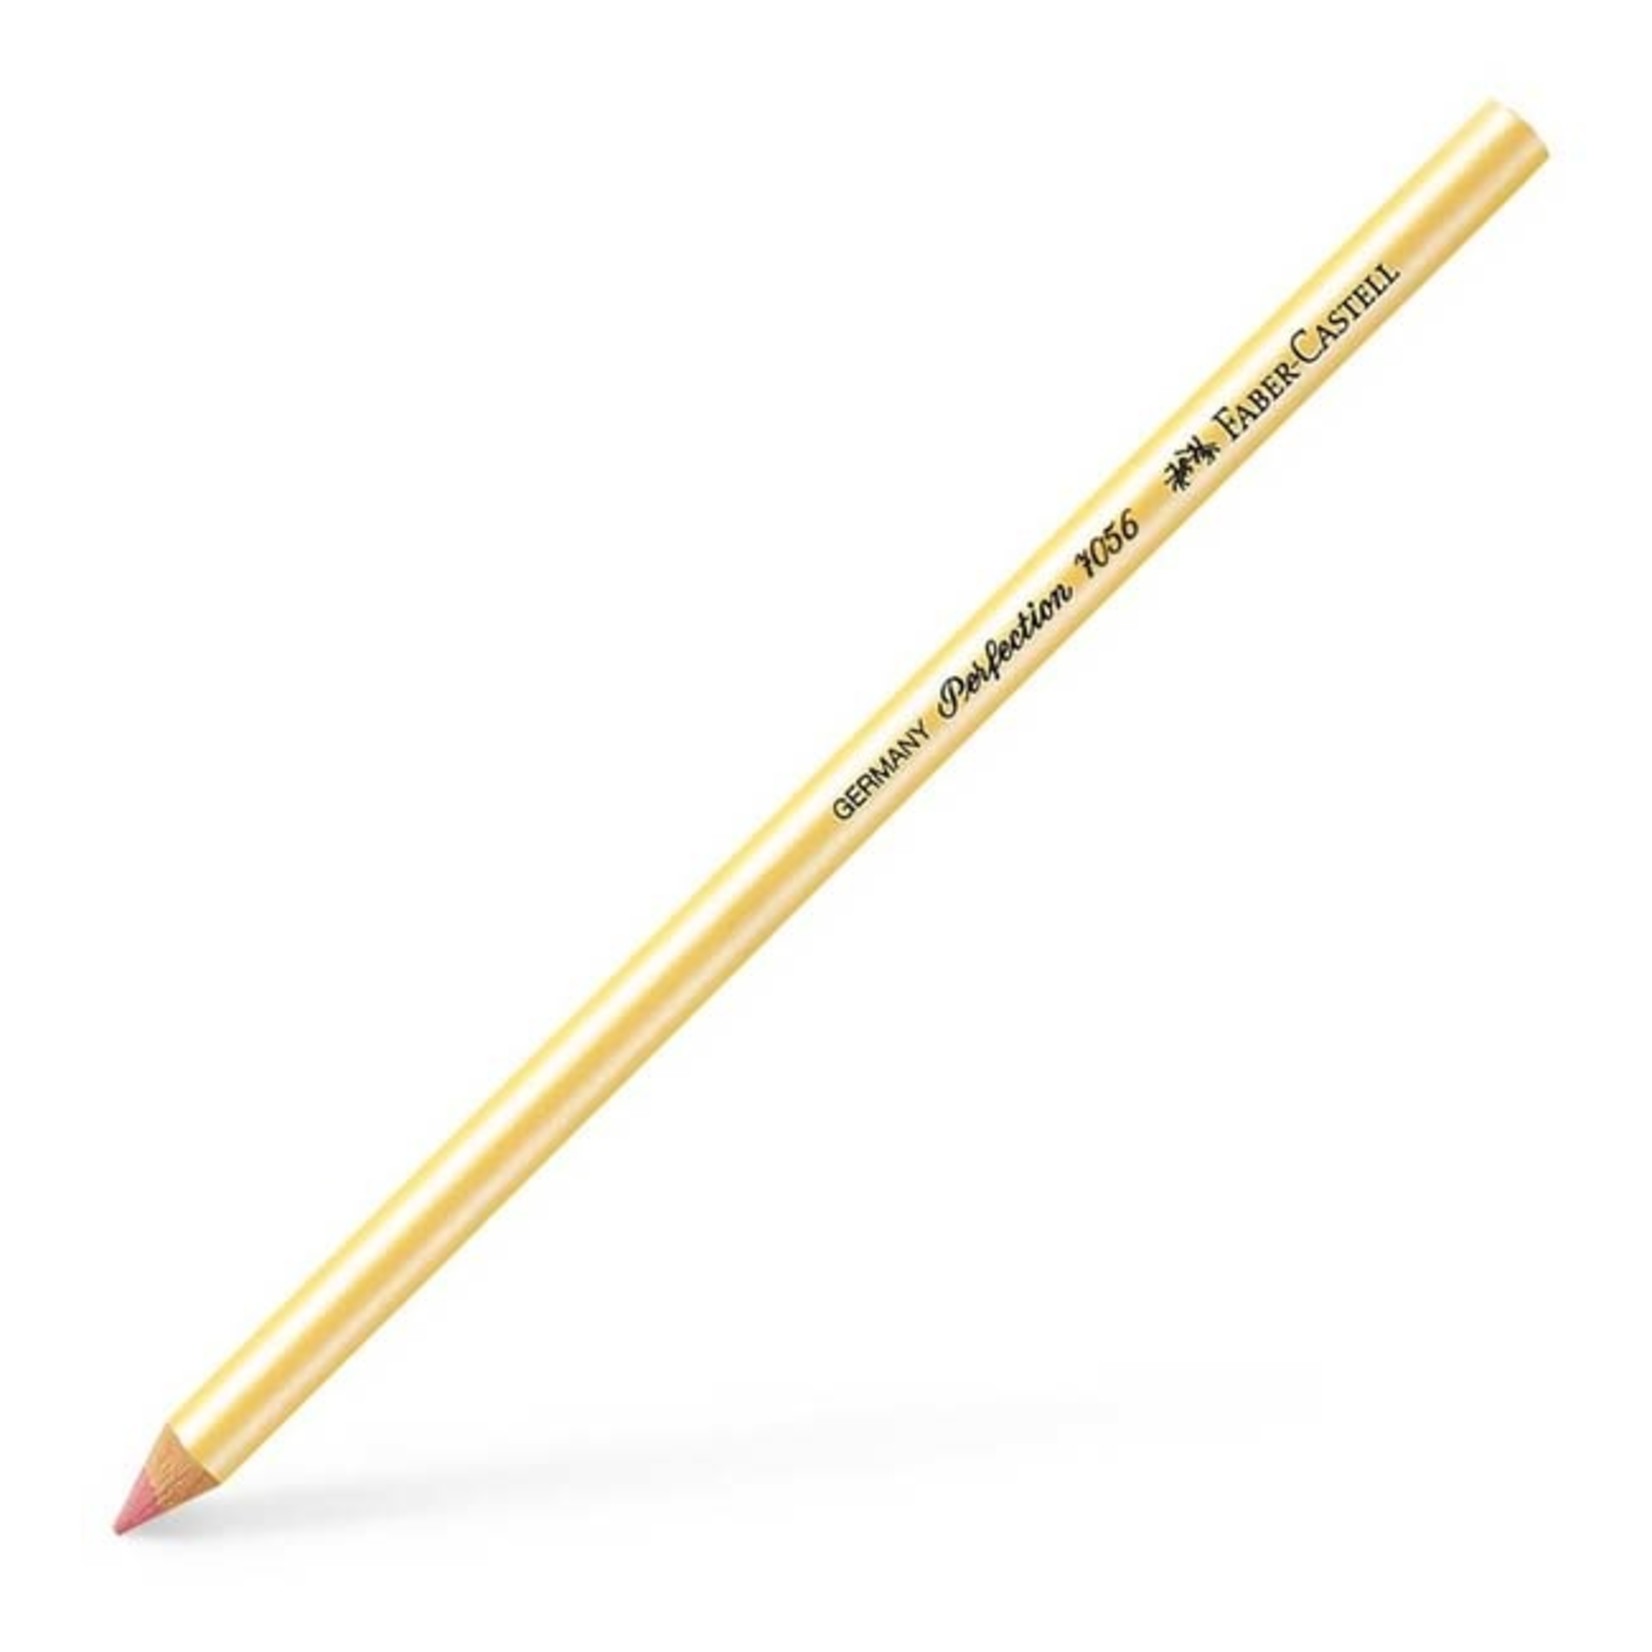 FABER CASTELL PERFECTION 7056 ERASER PENCIL